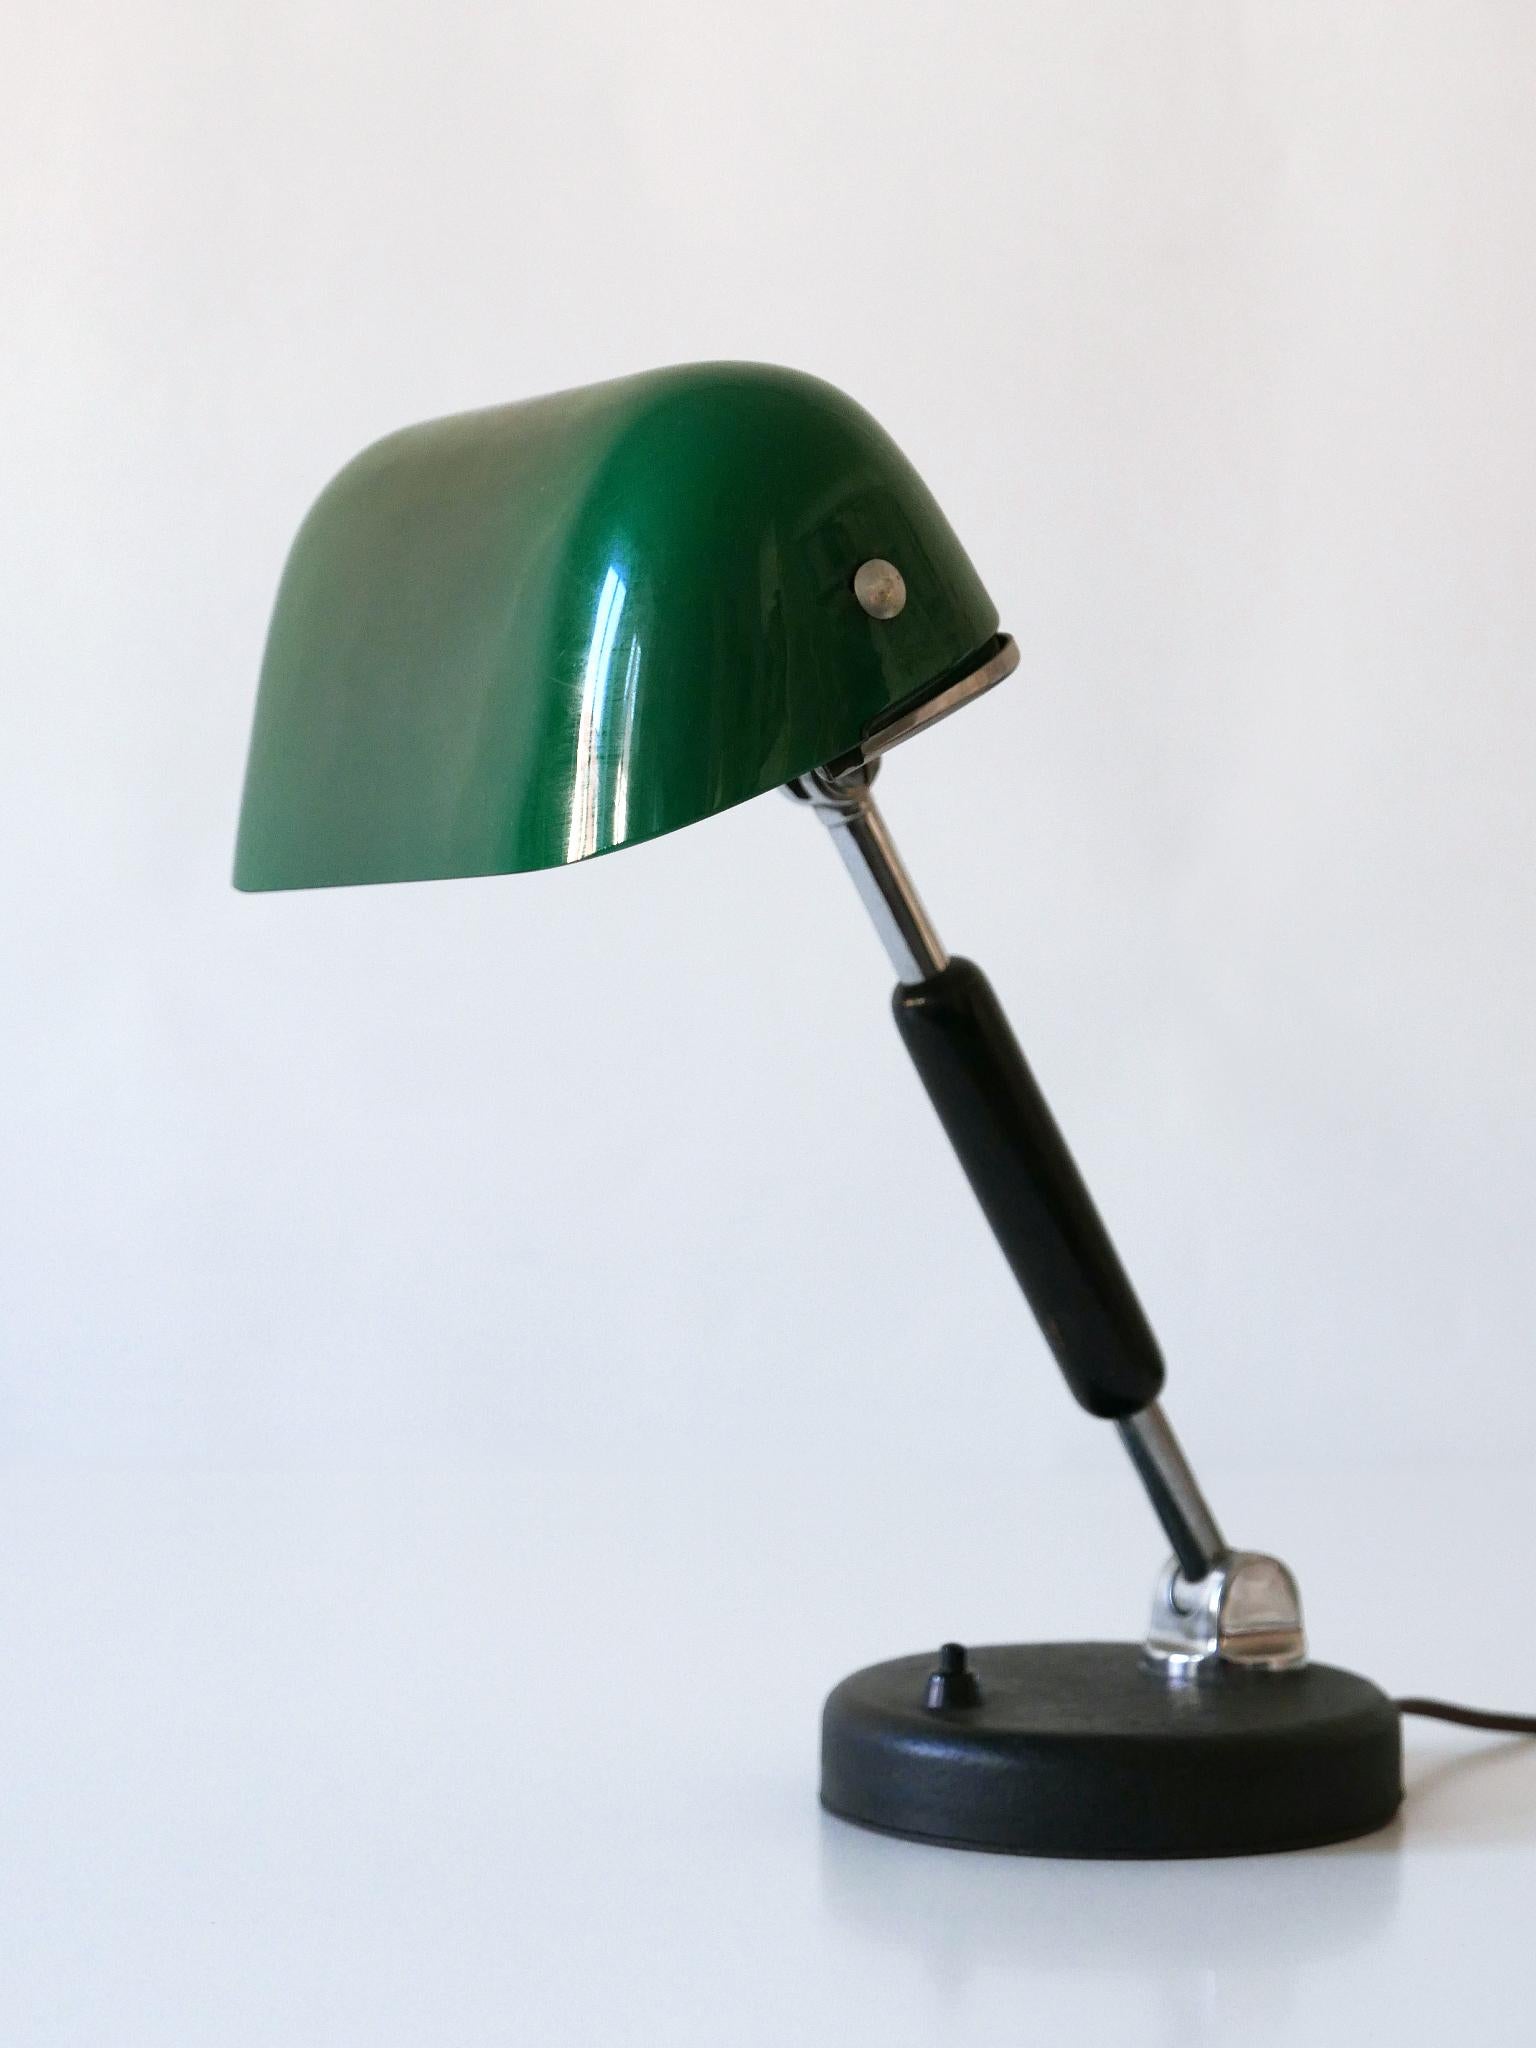 Exceptional Bauhaus Bankers Table Lamp with Original Green Glass, 1930s, Germany 5